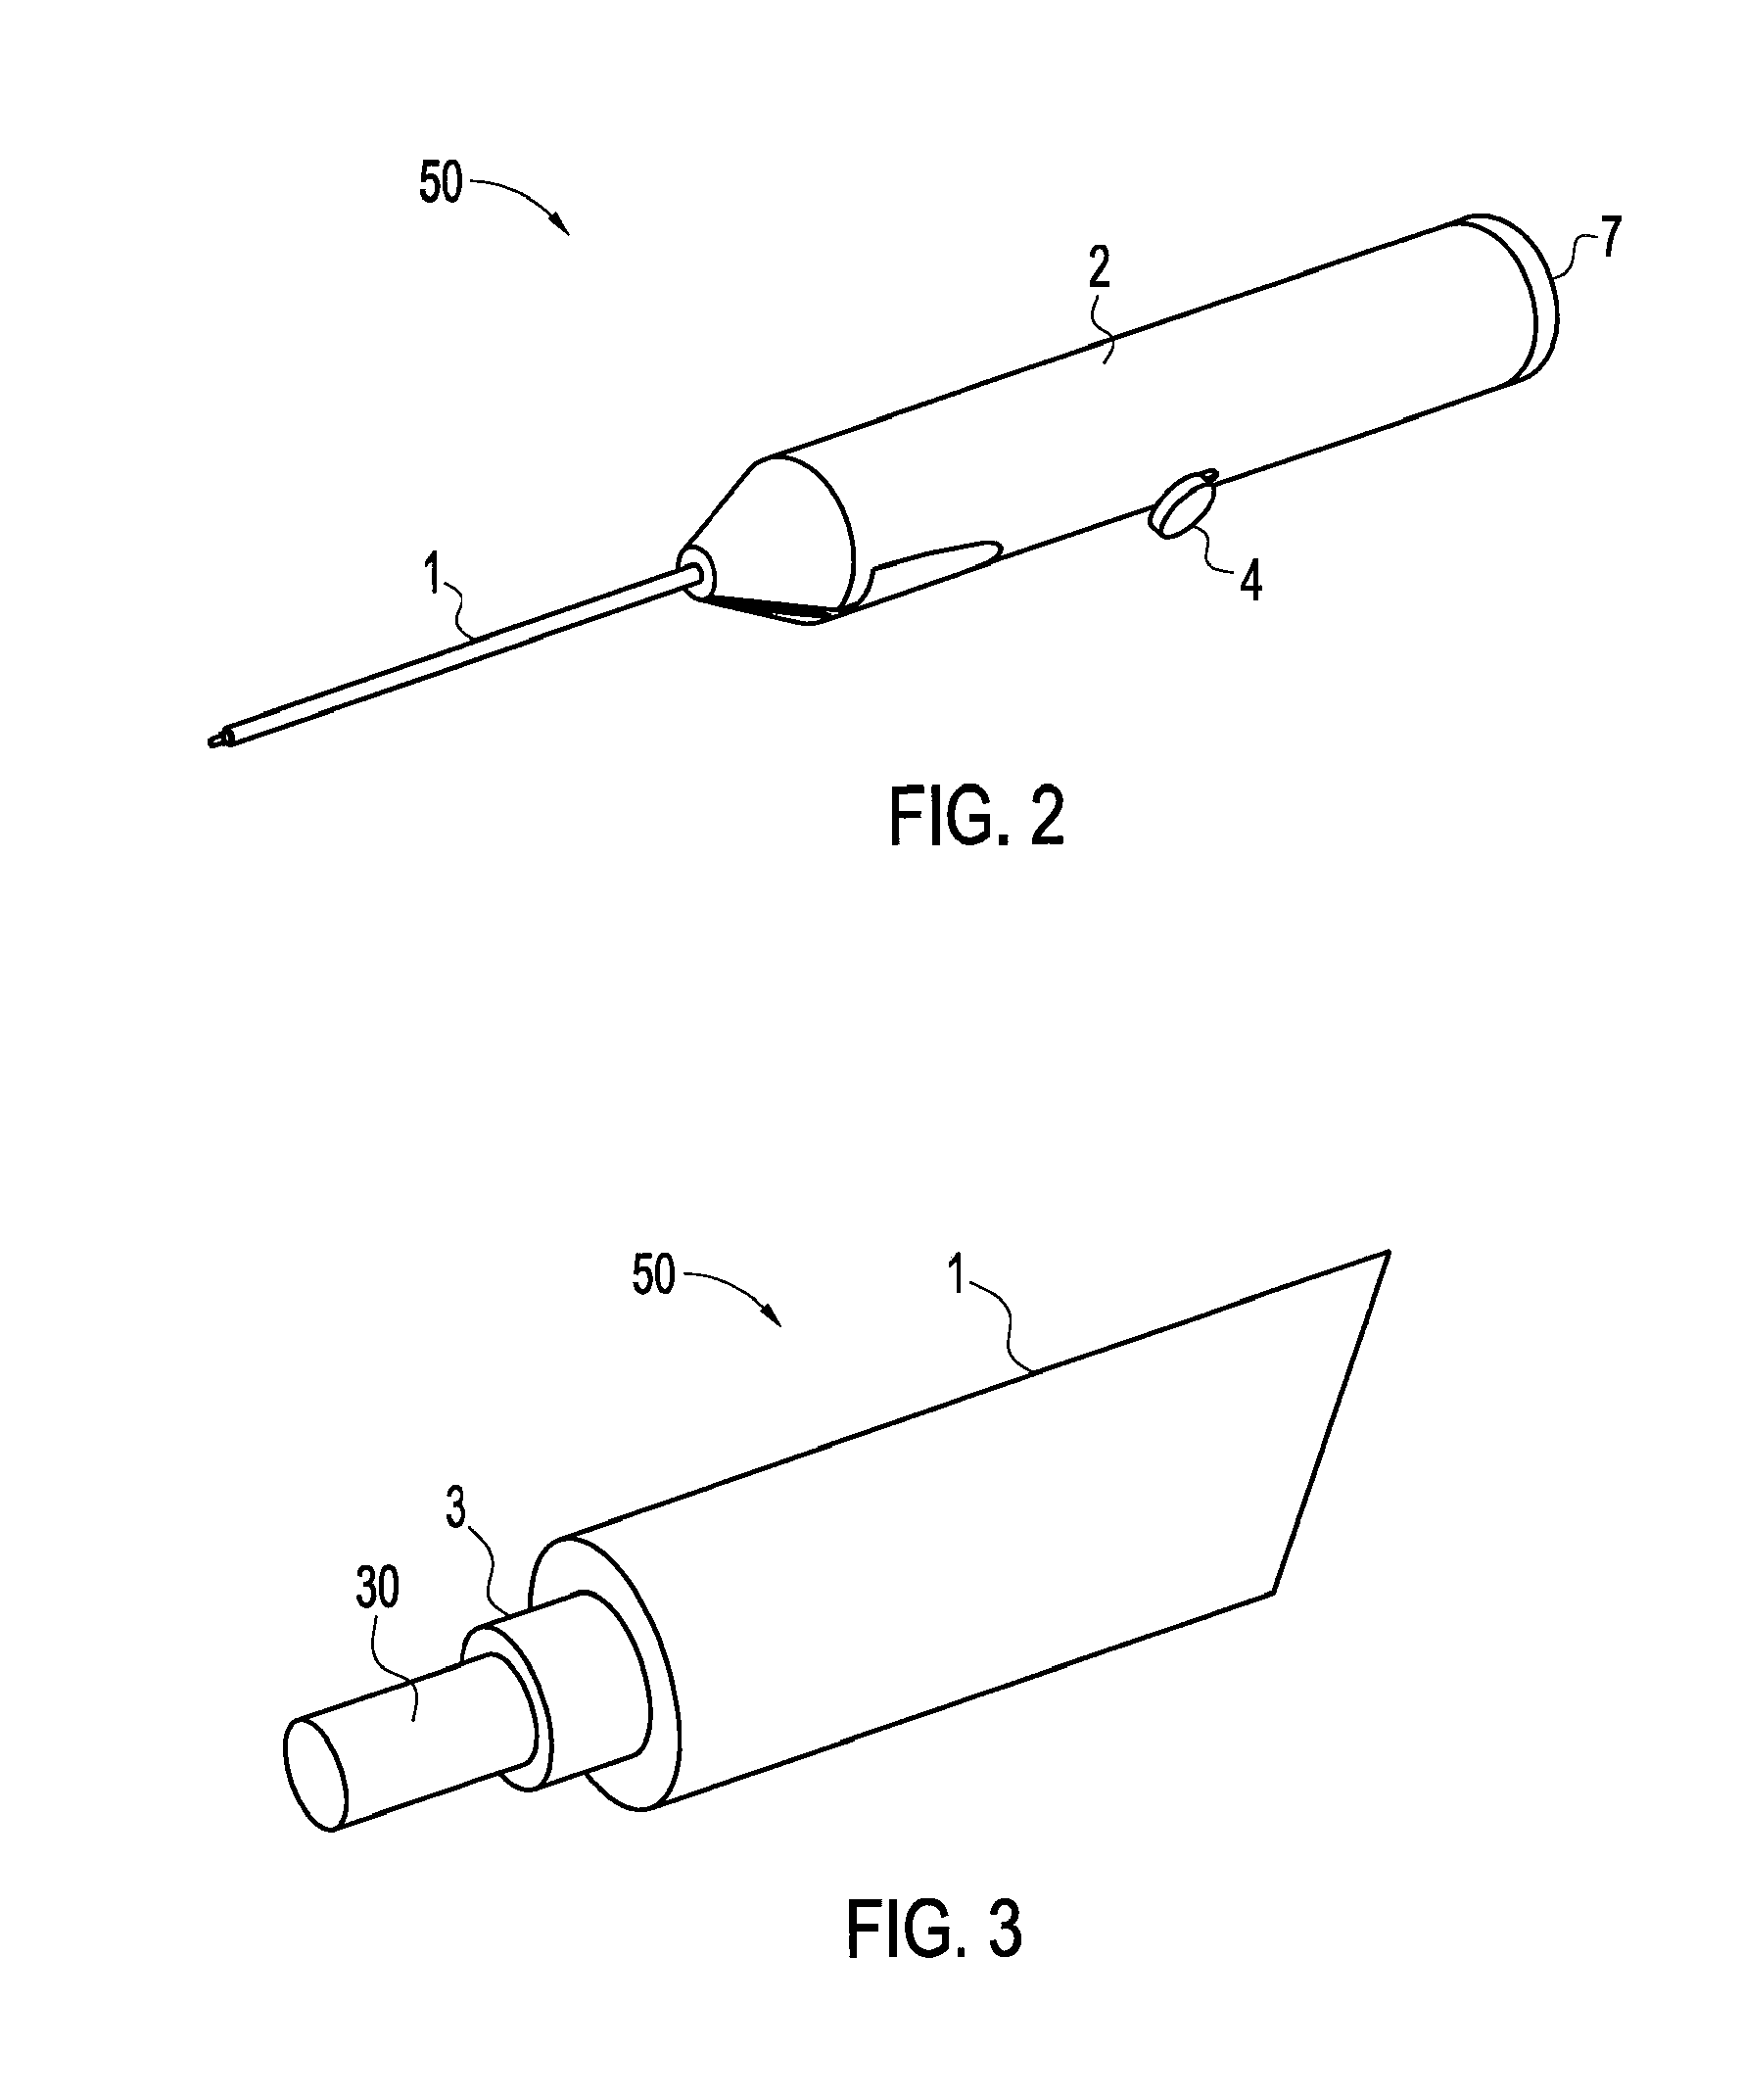 Applicator for suture/button construct